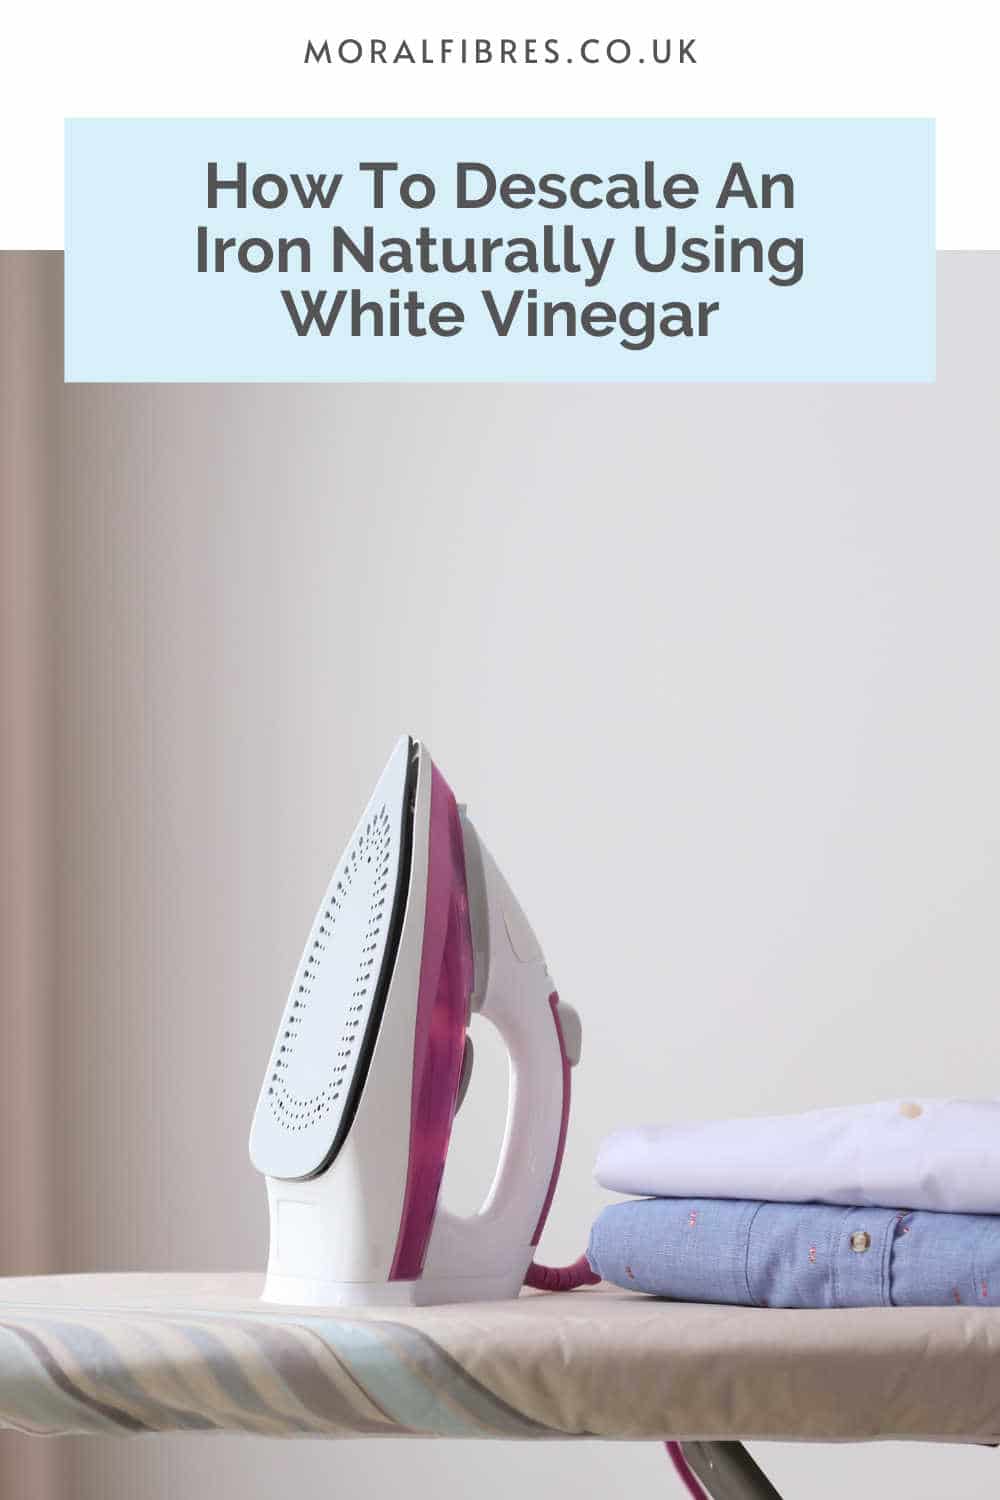 How To Descale An Iron With Vinegar